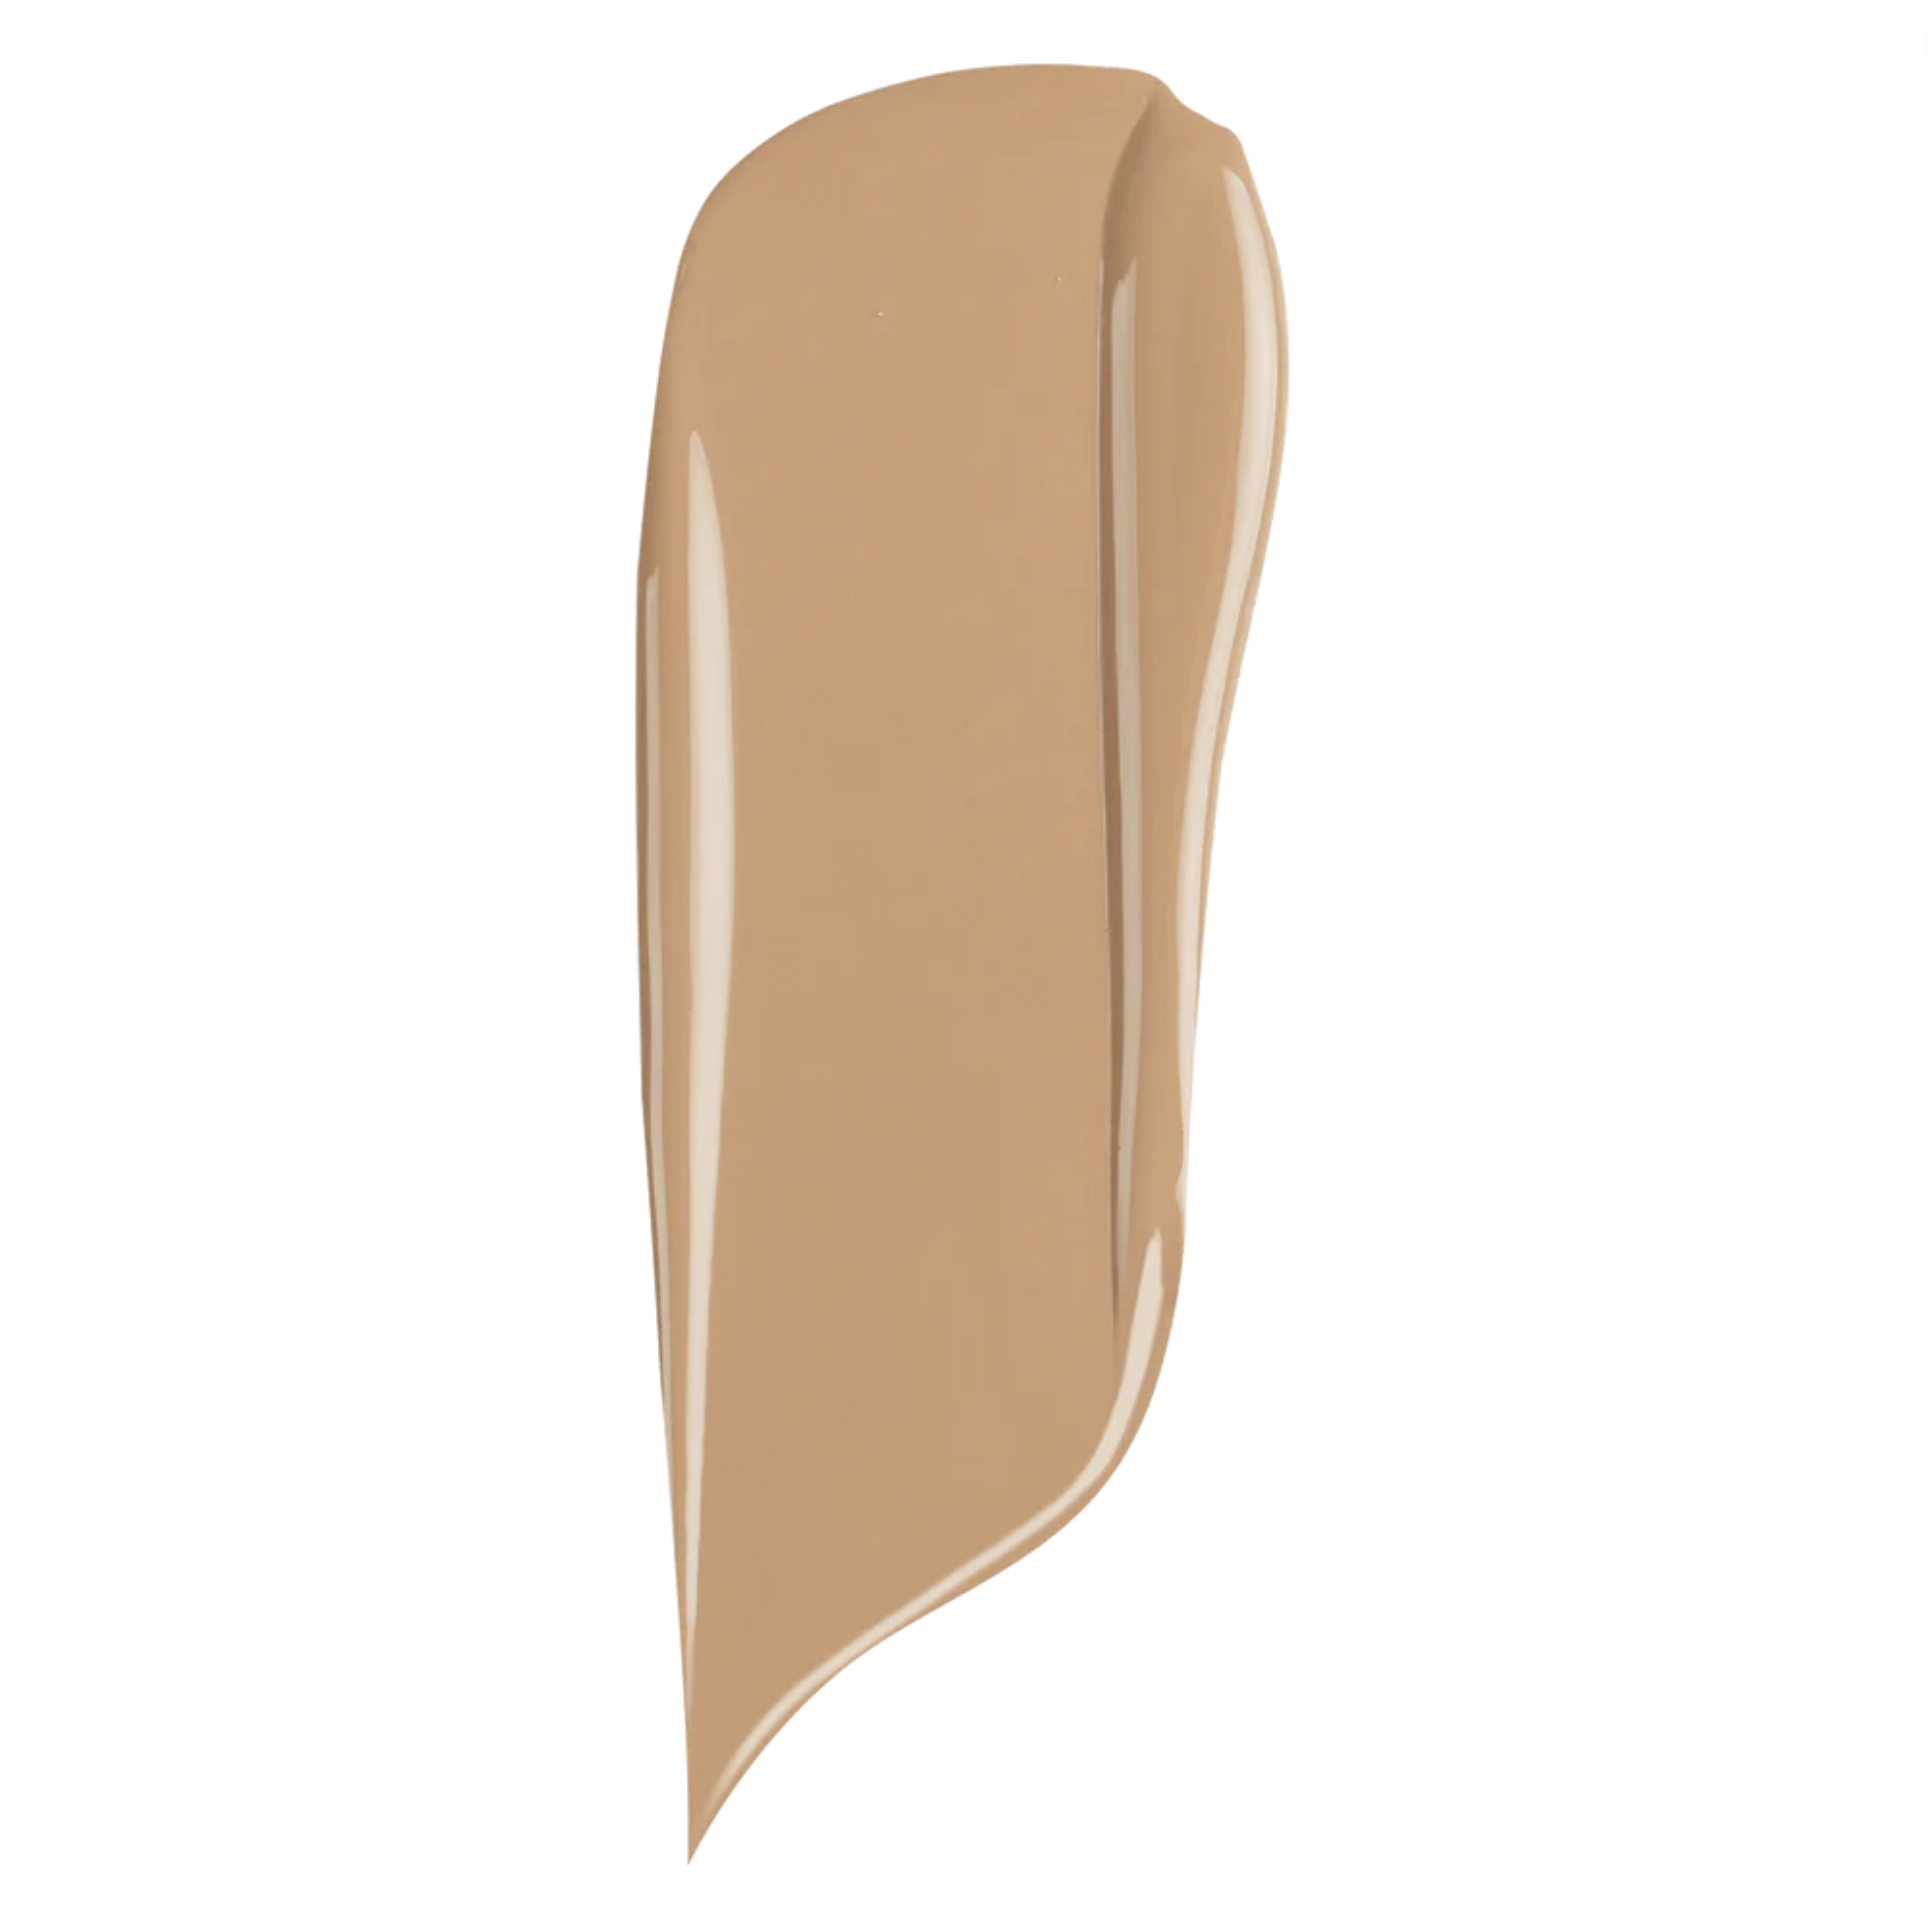 Inglot All Covered Foundation swatch - MW006